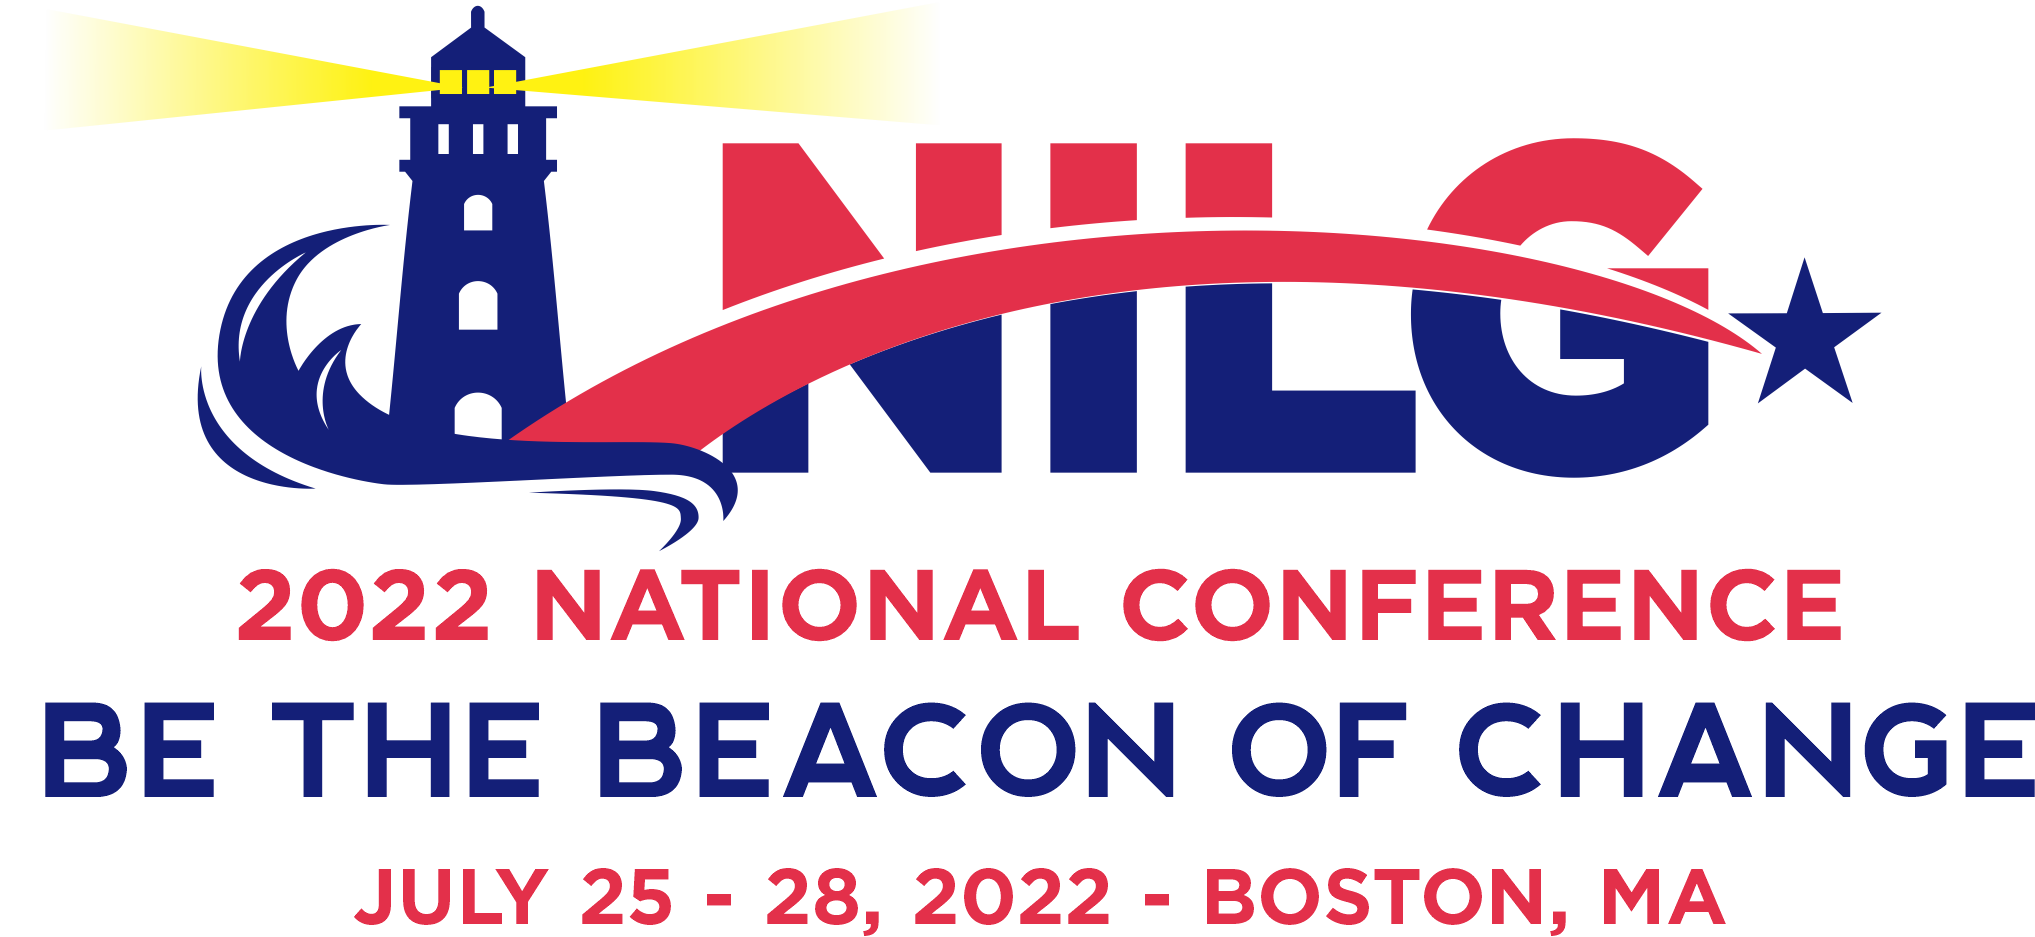 NILG 2022 National Conference - Be the Beacon of Change